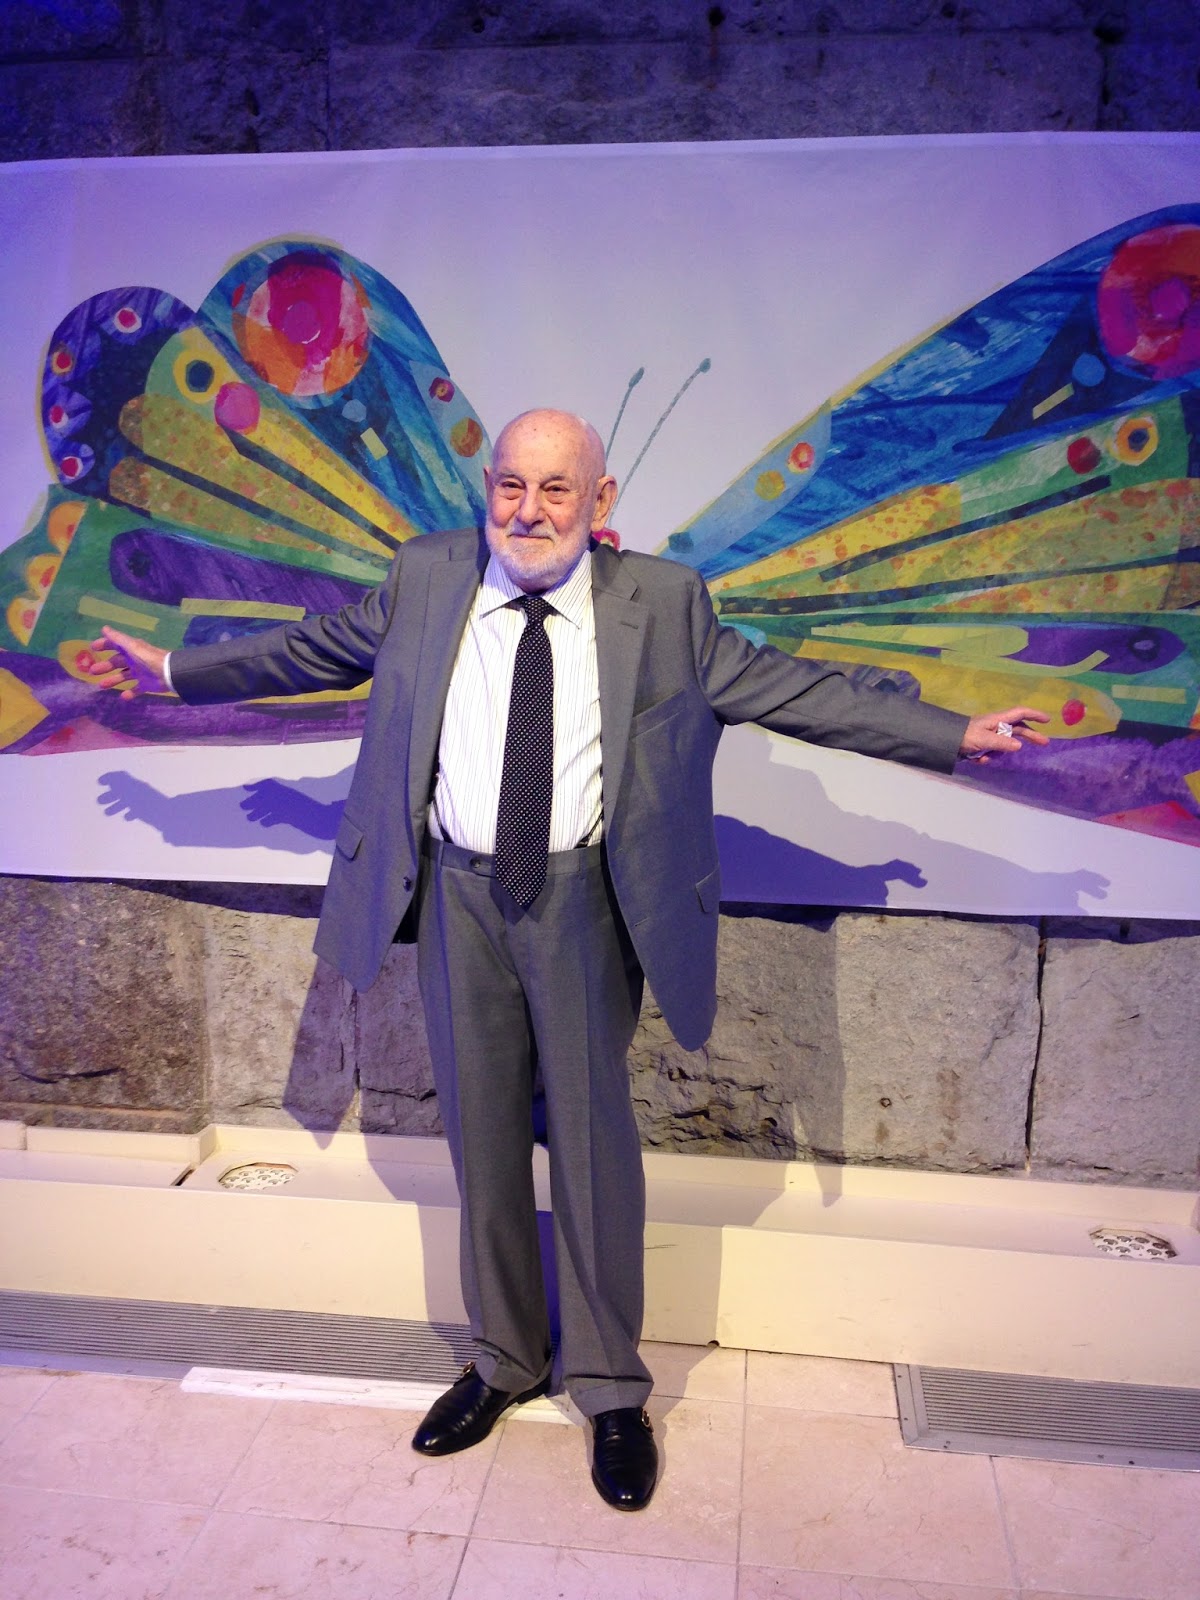 Eric Carle (Author of The Very Hungry Caterpillar)